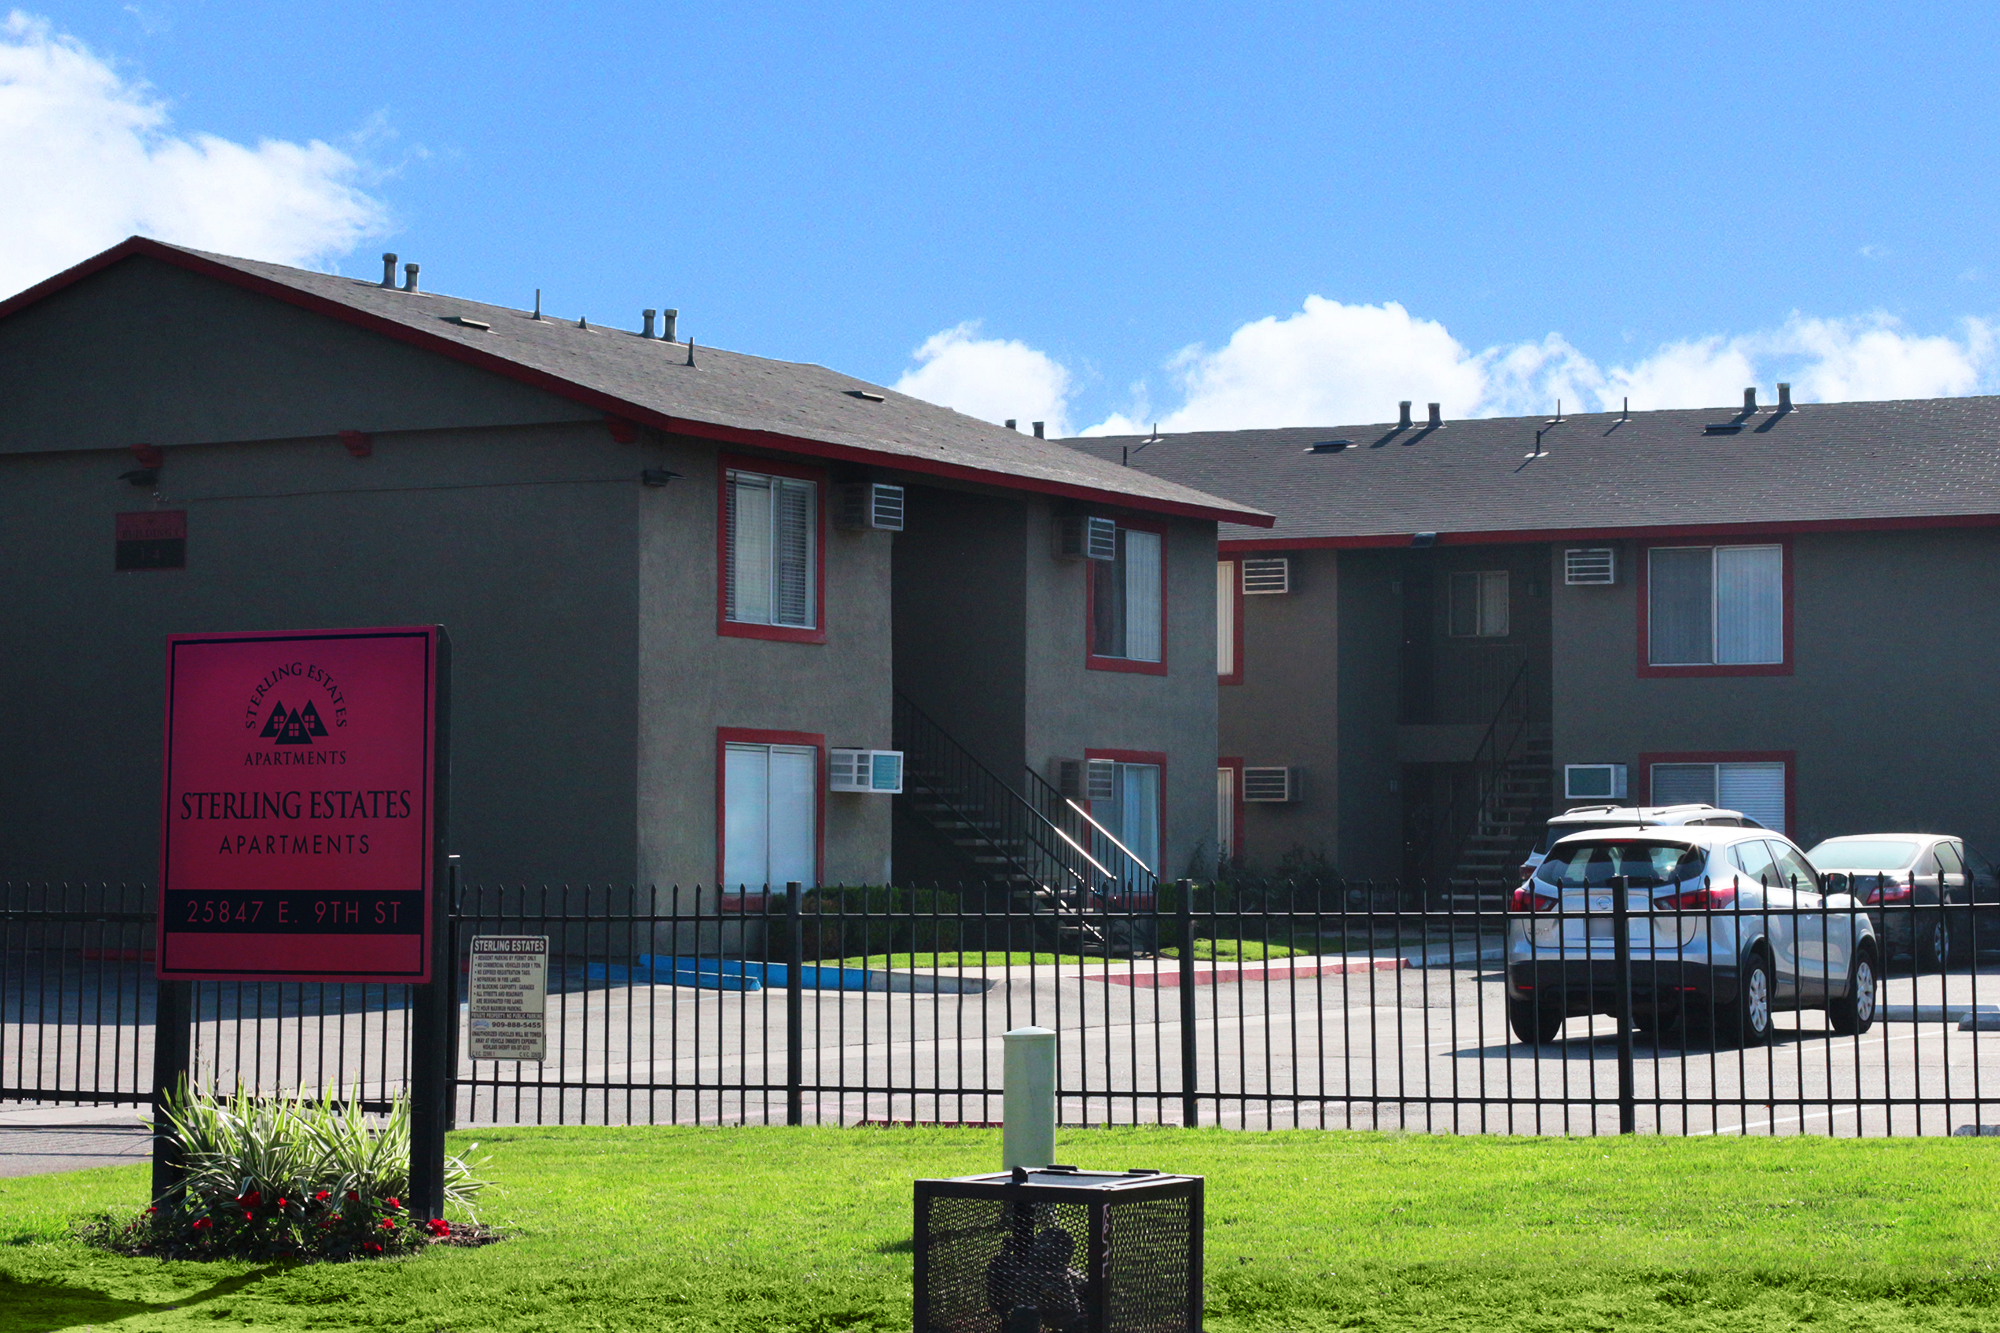 This image shows the exterior photo of Sterling Estates Apartments